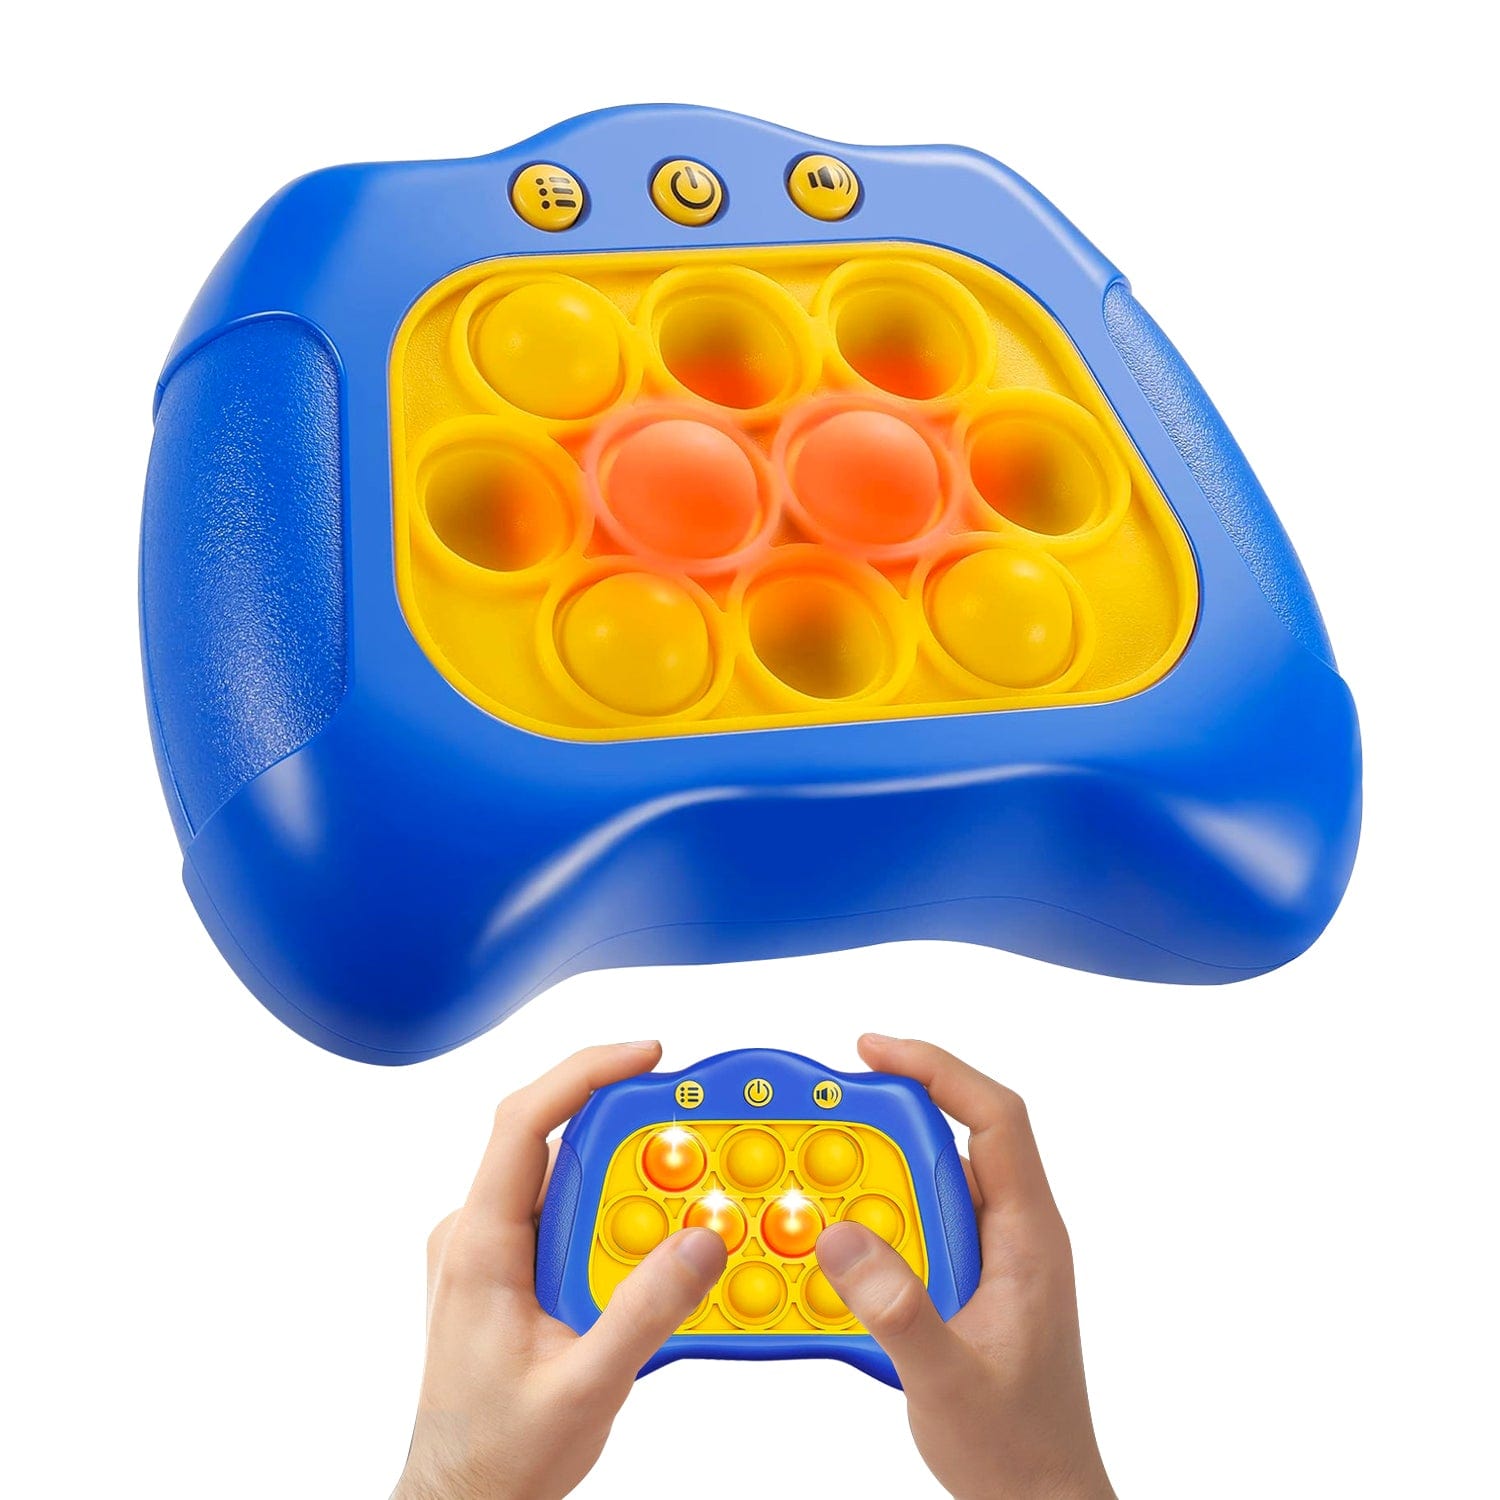 Living Today Light Up Pop & Play Game Toy for Kids